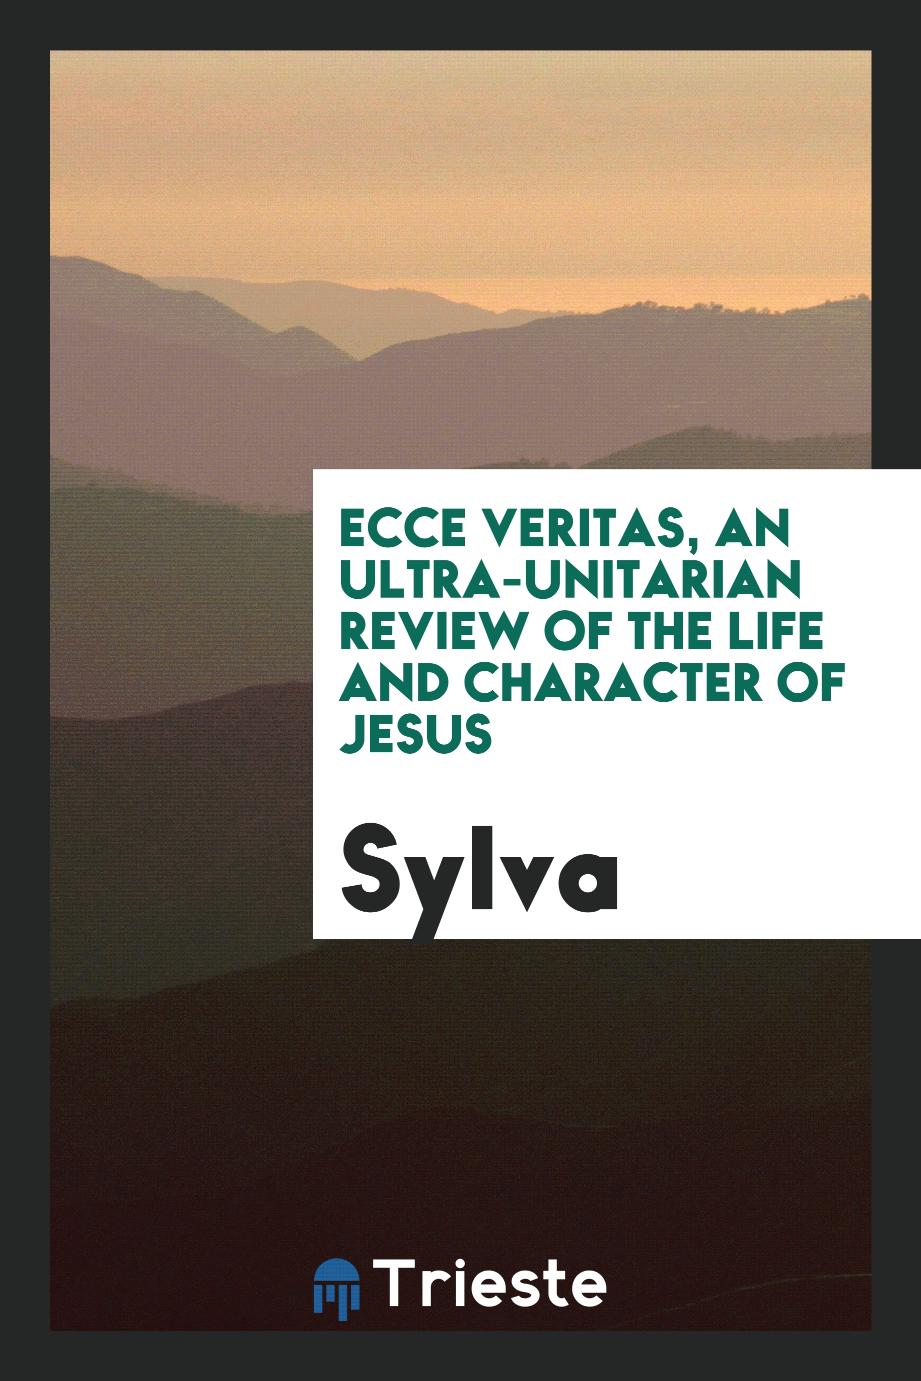 Ecce Veritas, an Ultra-Unitarian Review of the Life and Character of Jesus